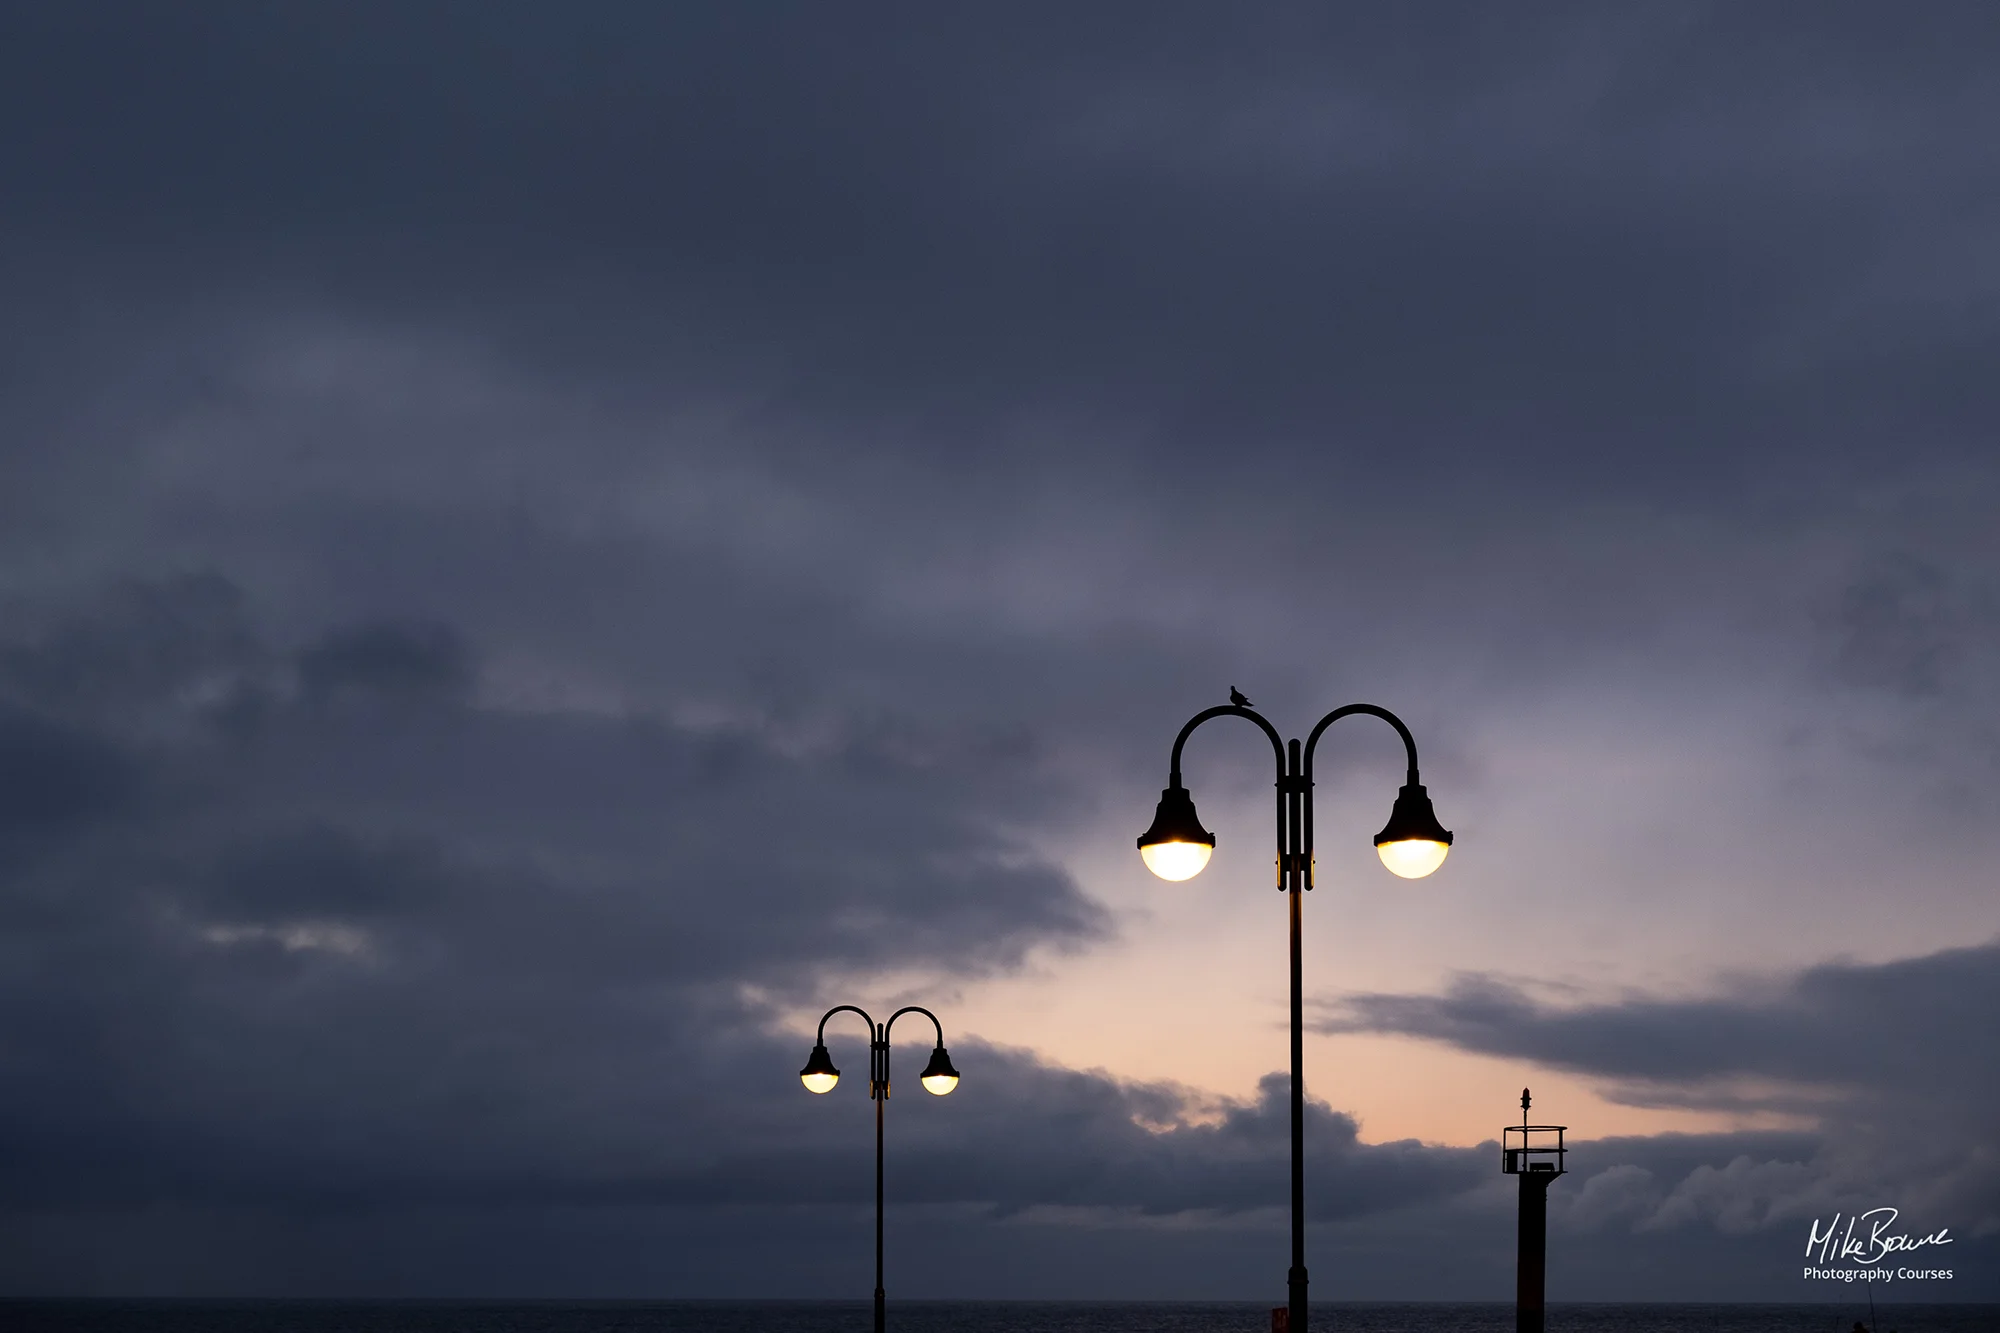 Two decorative street lamps with a bird sitting on one of them against pre-dawn cloudy sky